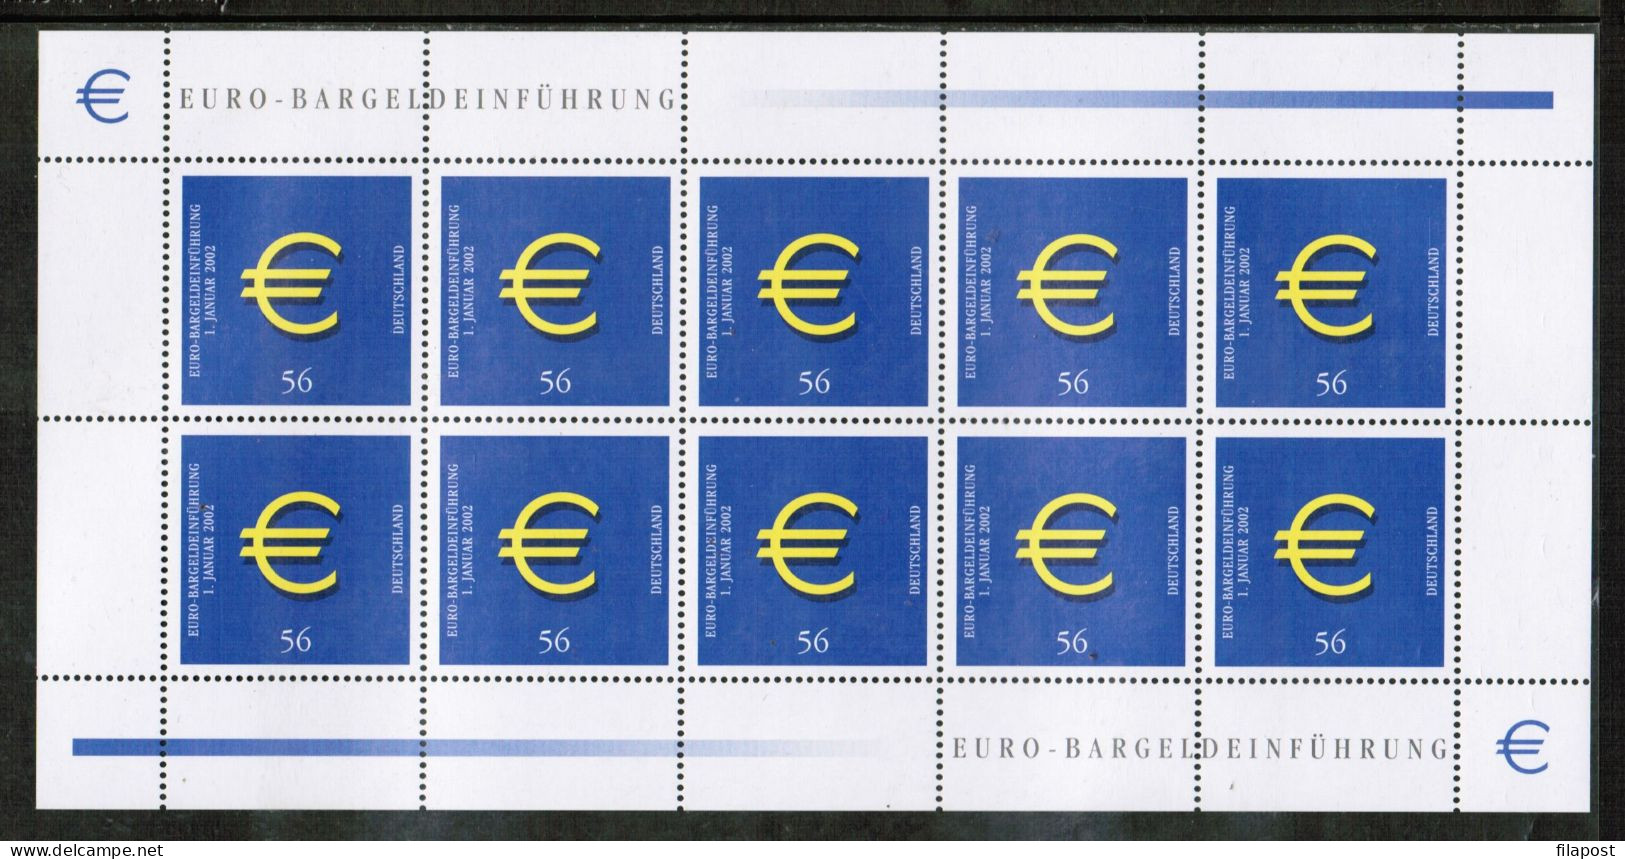 Germany 2002 / Michel 2234 Kb - 1 January 2002 Introduction Of Euro Cash - Sheet Of 10 Stamps MNH - Unused Stamps